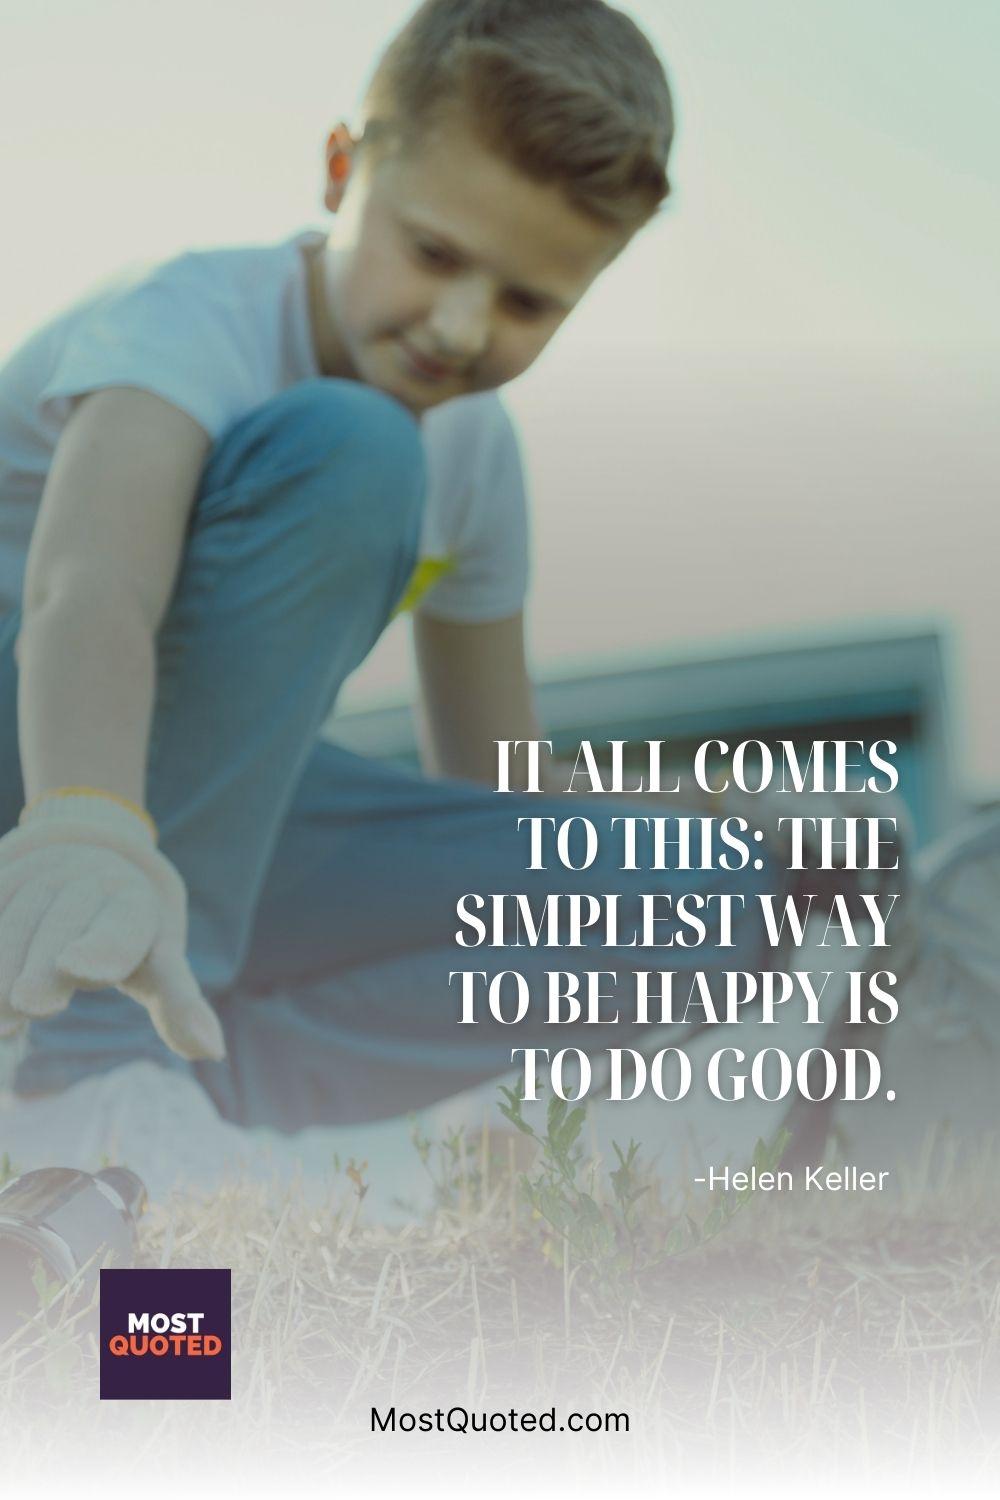 It all comes to this: the simplest way to be happy is to do good. - Helen Keller